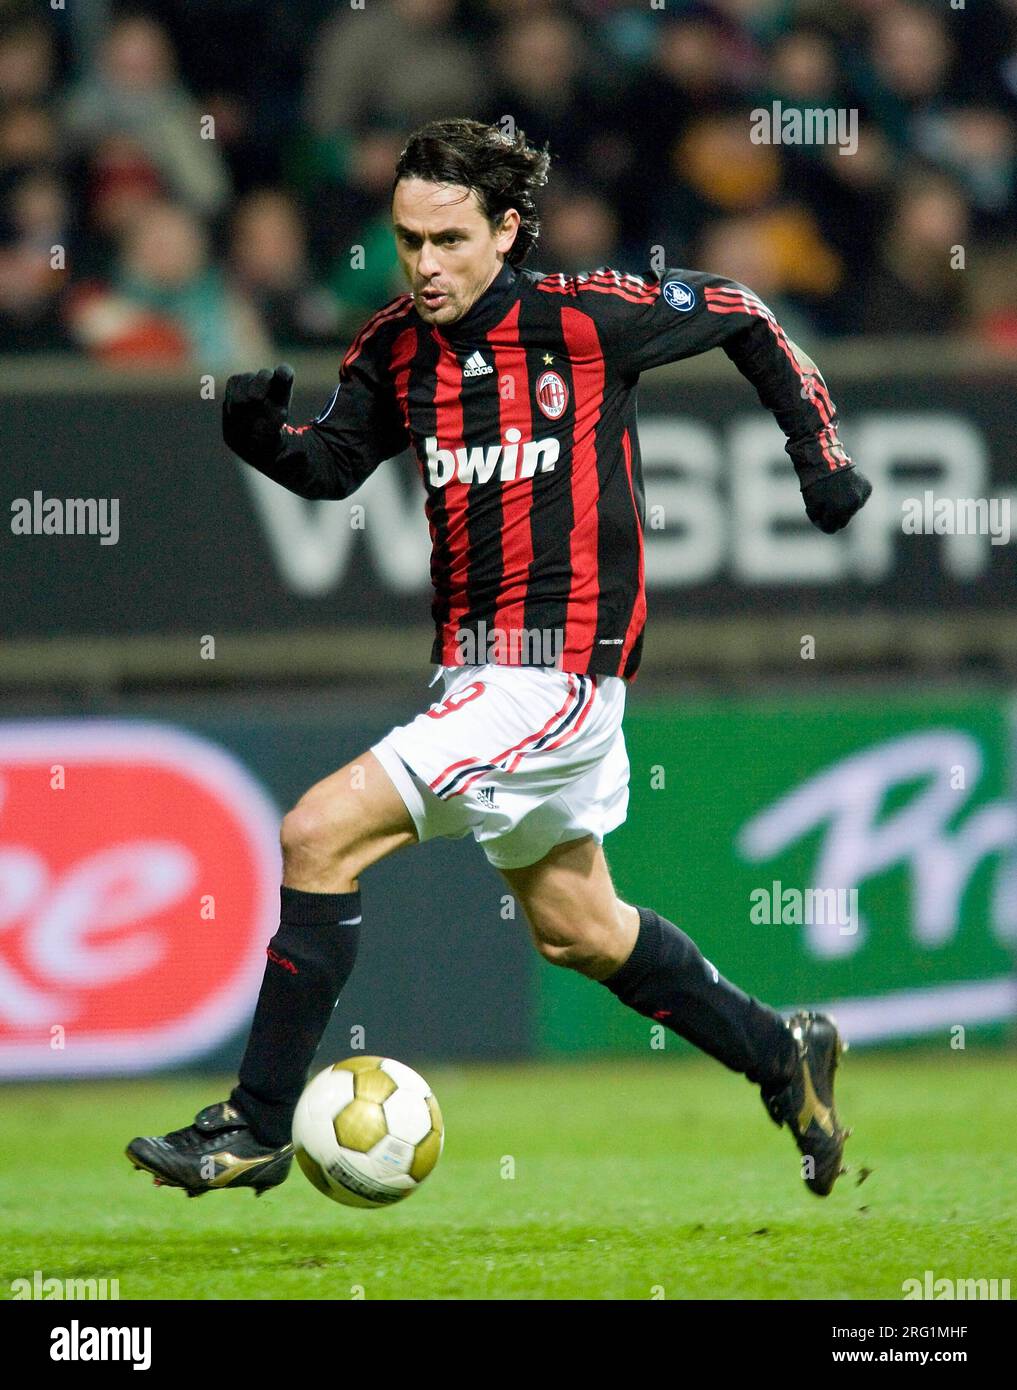 ARCHIVE PHOTO: Filippo INZAGHI will be 50 years old on August 9, 2023, Filippo INZAGHI, ITA, AC Milan, action, single action, whole figure, full body; Soccer UEFA Cup 7th matchday first leg, SV Werder Bremen (GER) - AC Milan (ITA) 1:1, on February 18th, 2009 in Bremen, season 0809 ?Sven Simon # Prinzess-Luise-Str. 41 # 45479 M uelheim/R uhr # Tel. 0208/9413250 # Fax. 0208/9413260 # Account 244 293 433 # P ostbank Essen # BLZ 360 100 43 # e-mail: svensimon@t-online.de #www.SvenSimon.net. Stock Photo